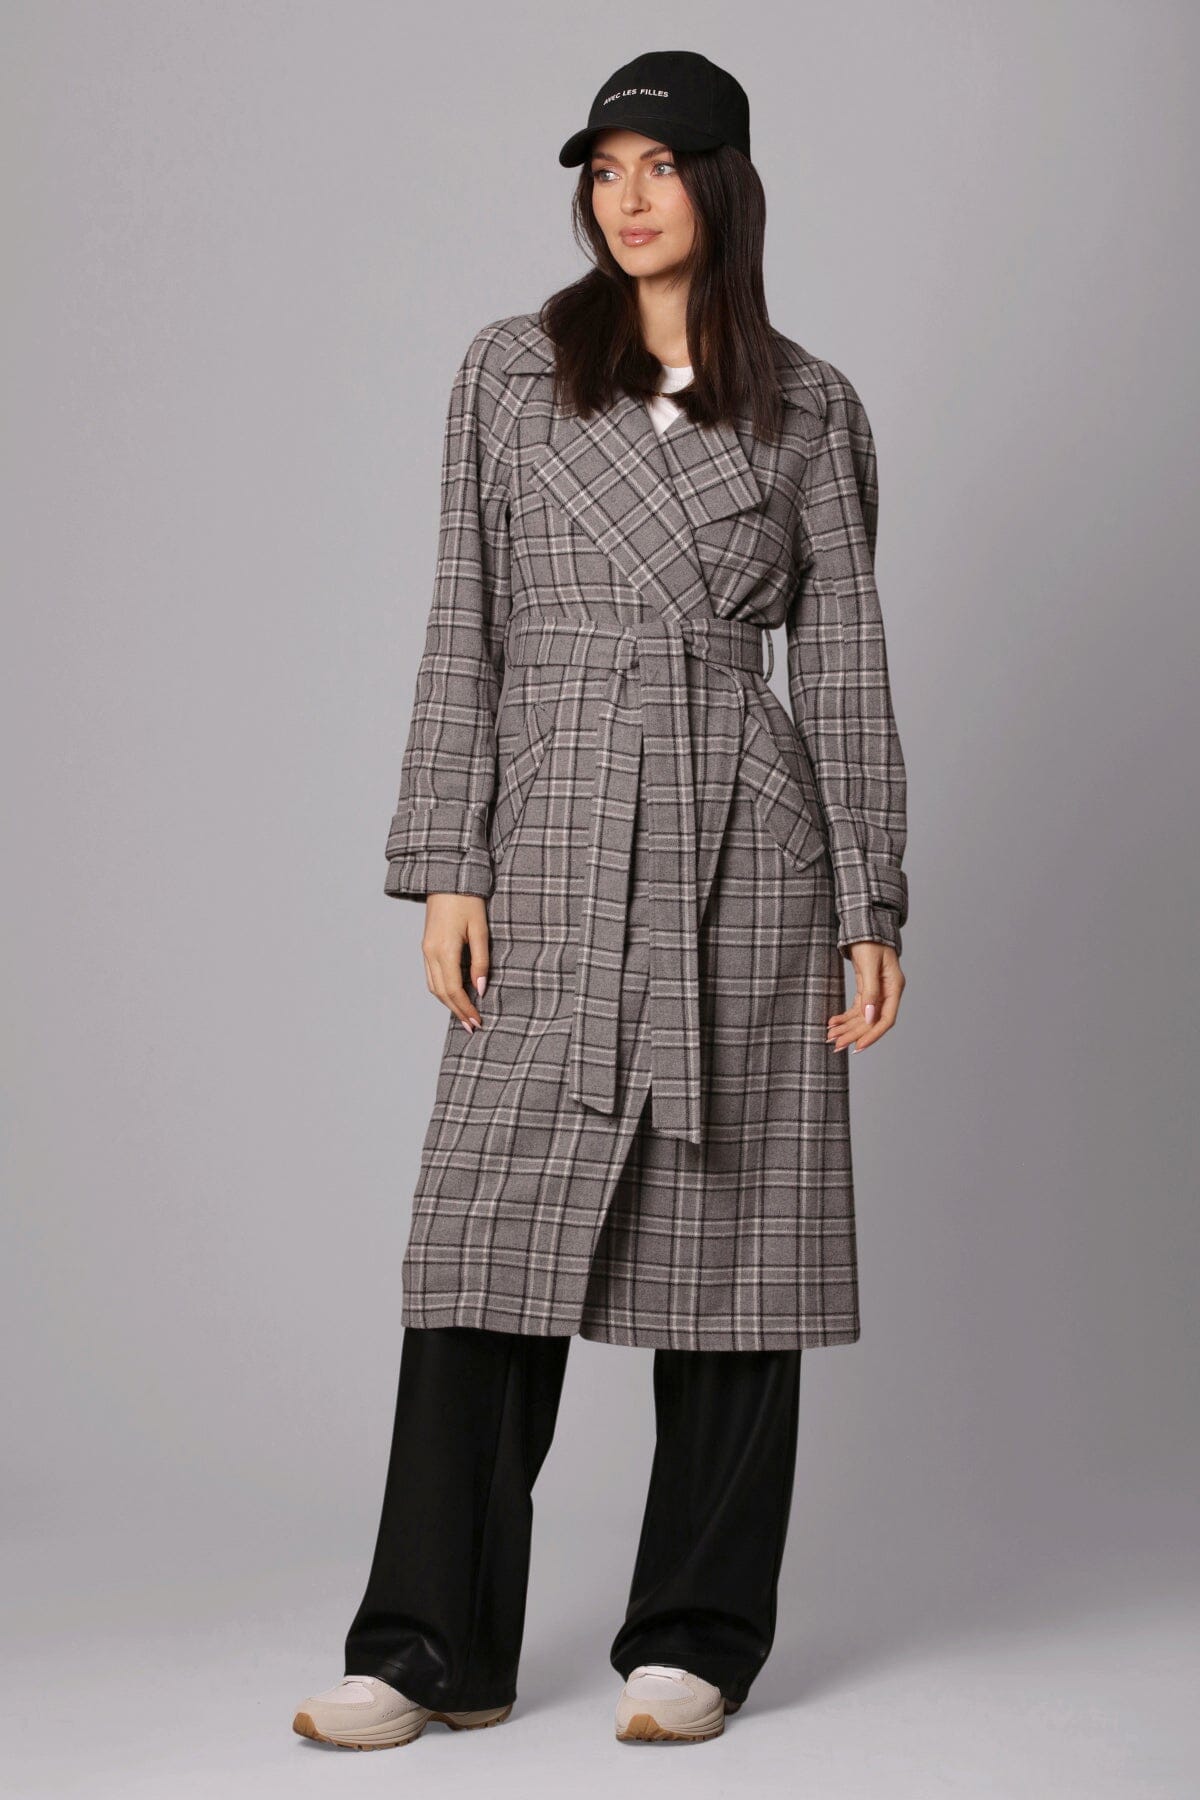 open front drape trench coat charcoal grey plaid outerwear - women's figure flattering designer fashion day to night coats